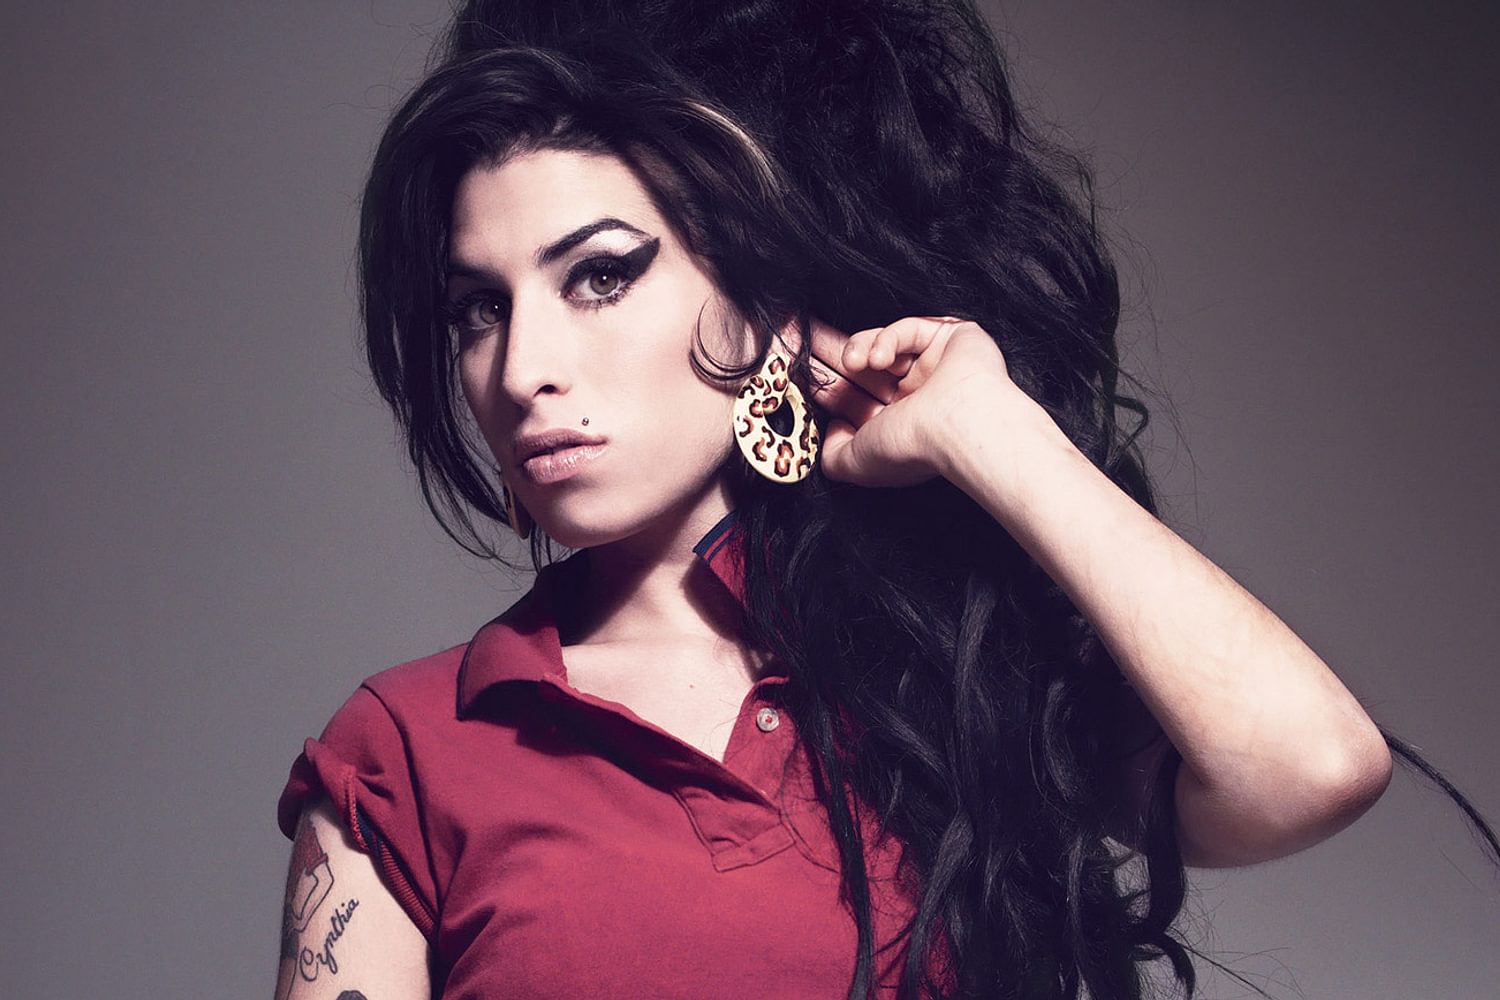 ‘Amy’ director dismisses Mitch Winehouse’s claim new documentary is "misleading"